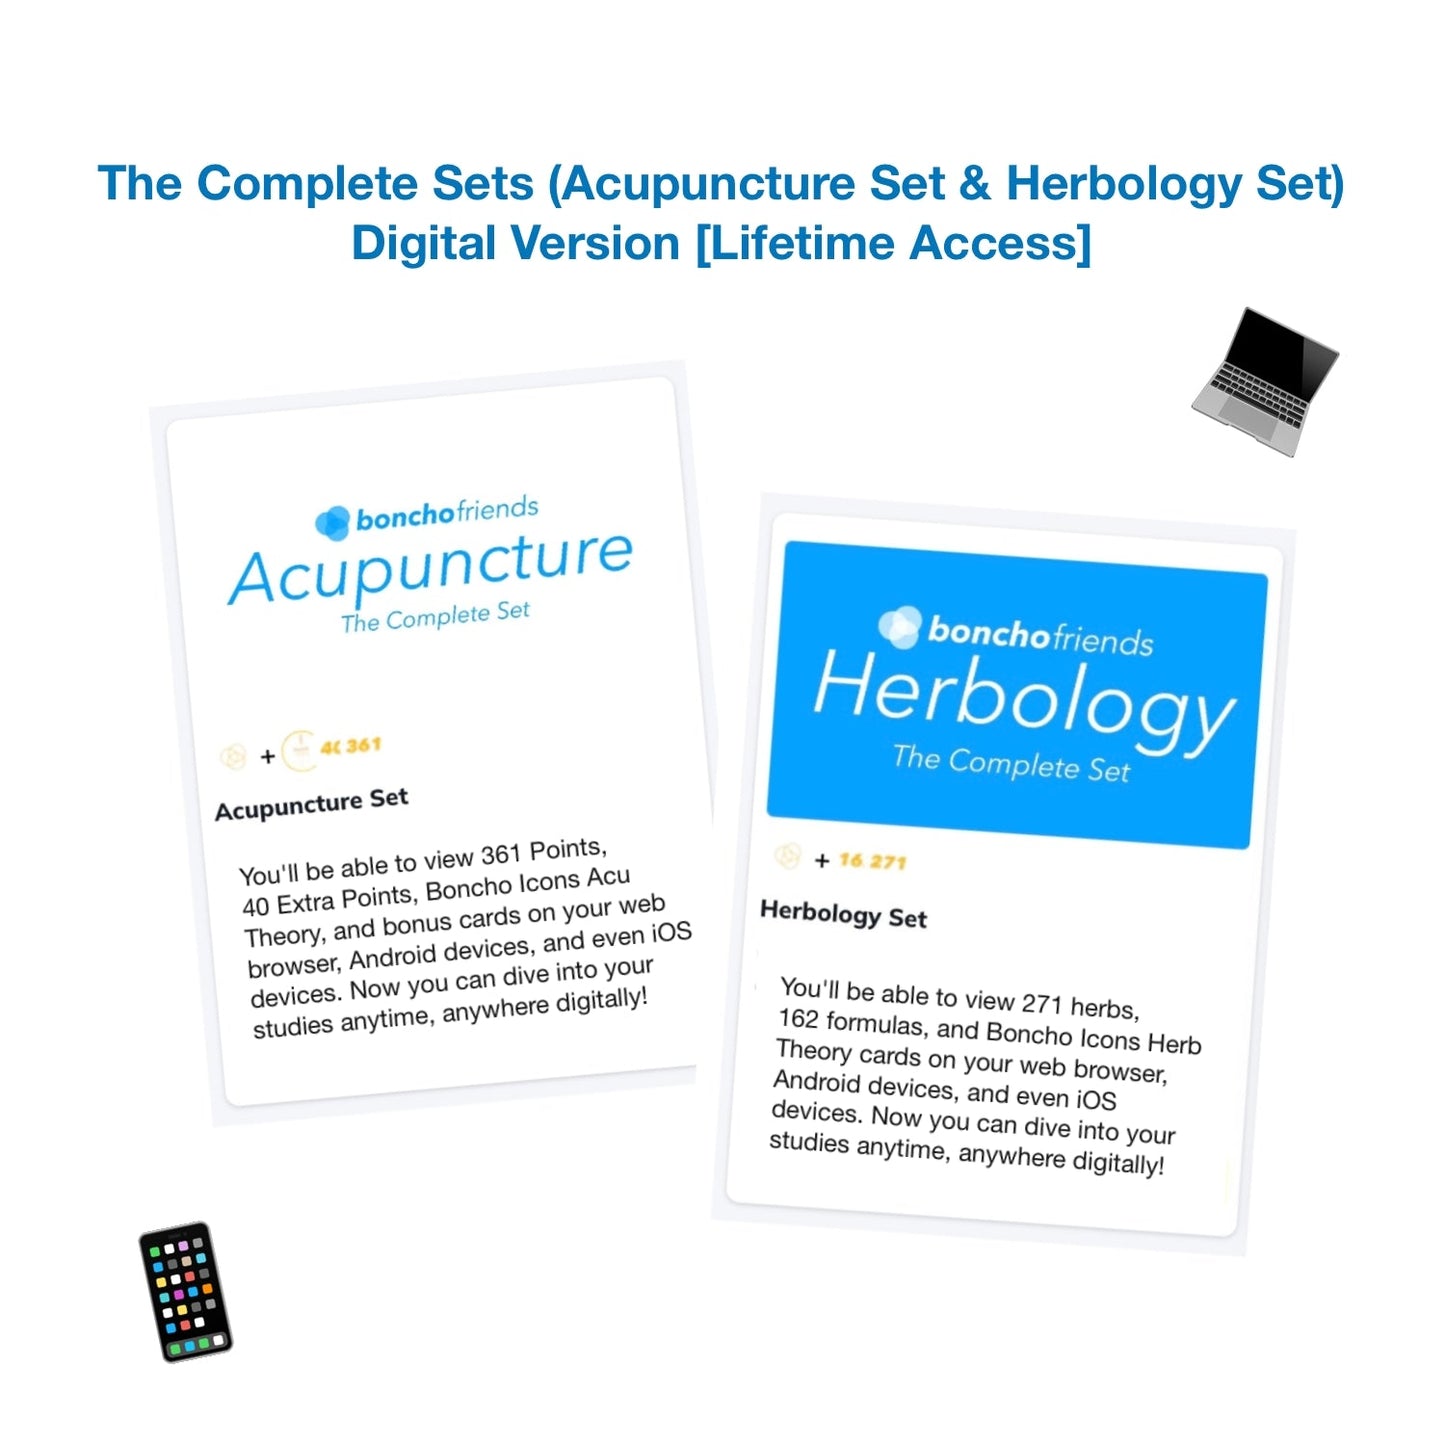 Boncho Friends Complete Set - Acupuncture Set and Herbology Set - Get the complete set and receive lifetime access digital version 